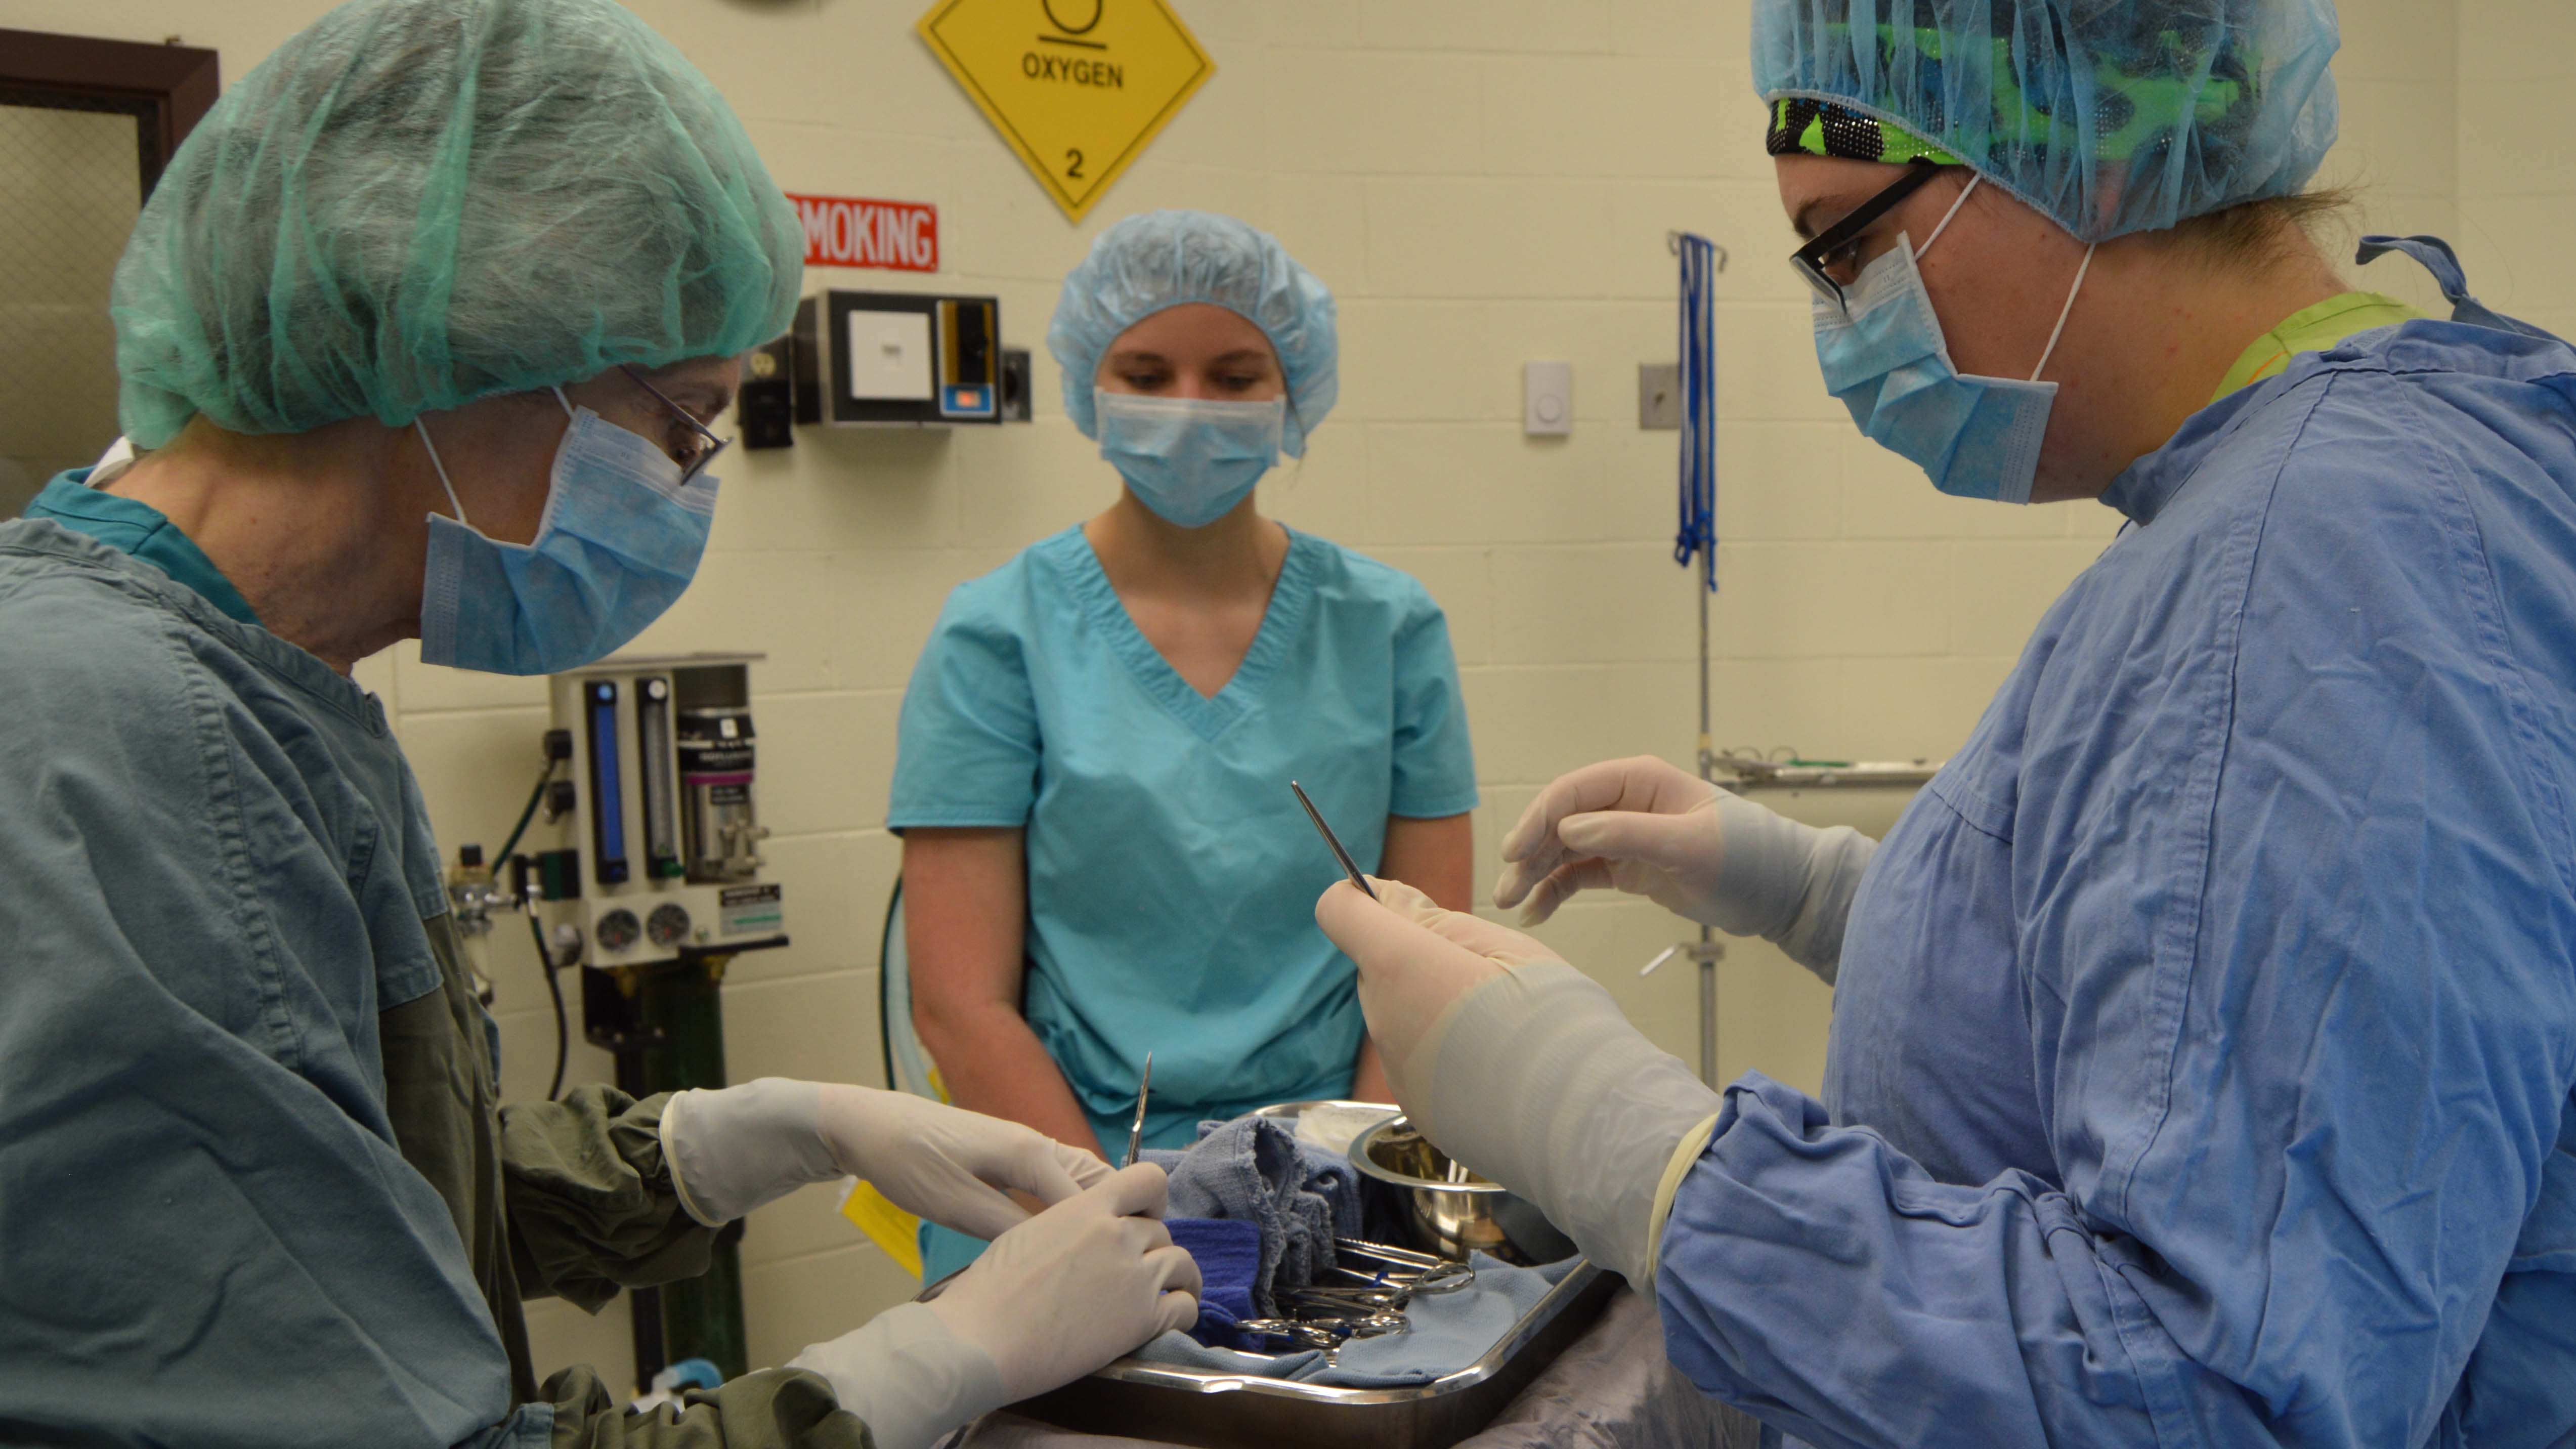 NCTA’s veterinary technician program prepares graduates for careers in animal care through their hands-on skills such as assisting NCTA professor and veterinarian Dr. Ricky Sue Barnes in surgery. (Mary Crawford / NCTA News)